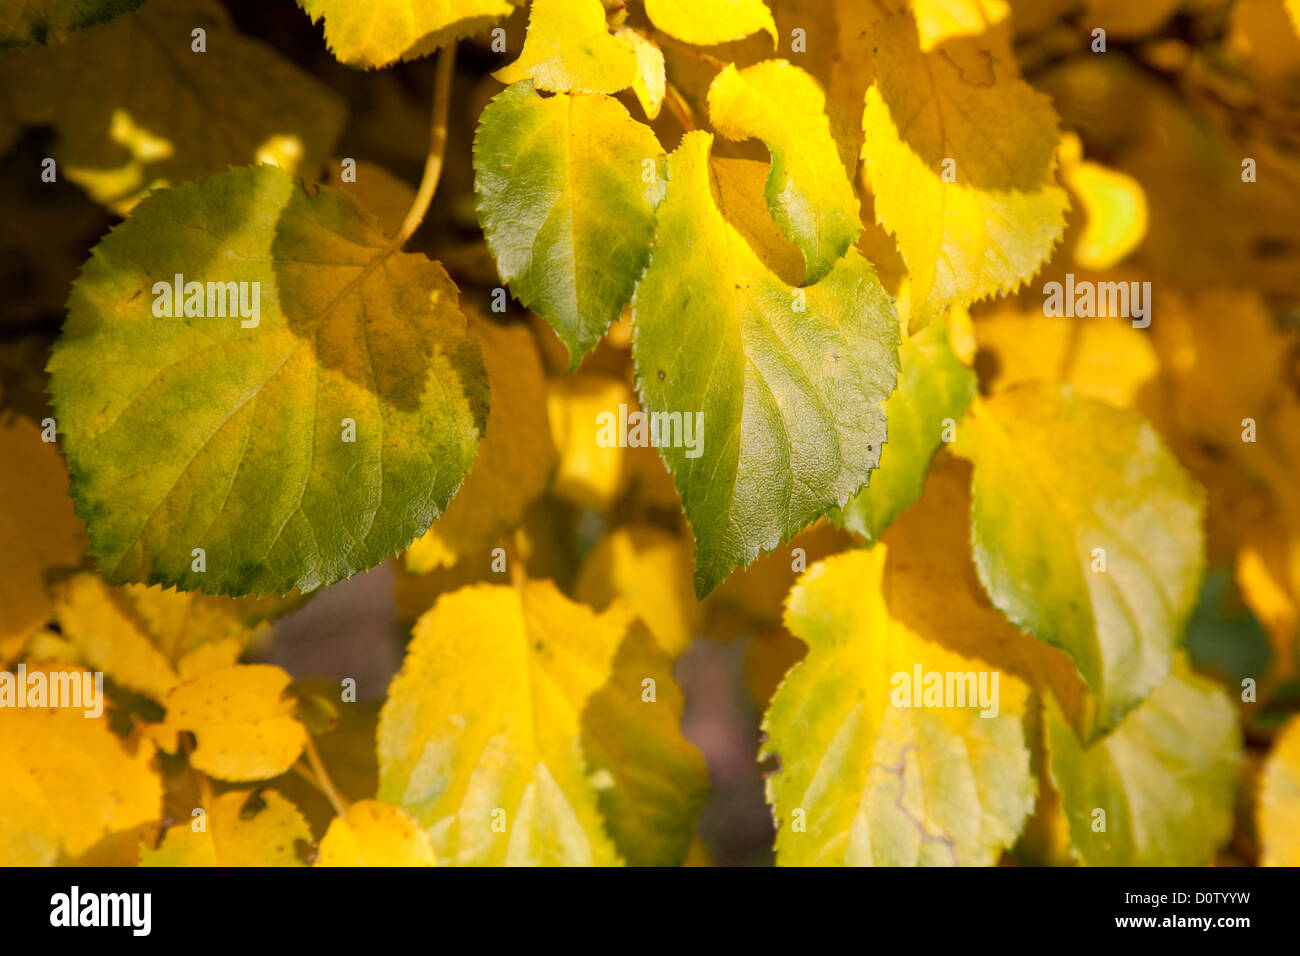 Fall, fall colors, fall color, yellow, discoloration, leaves, bushes Stock Photo